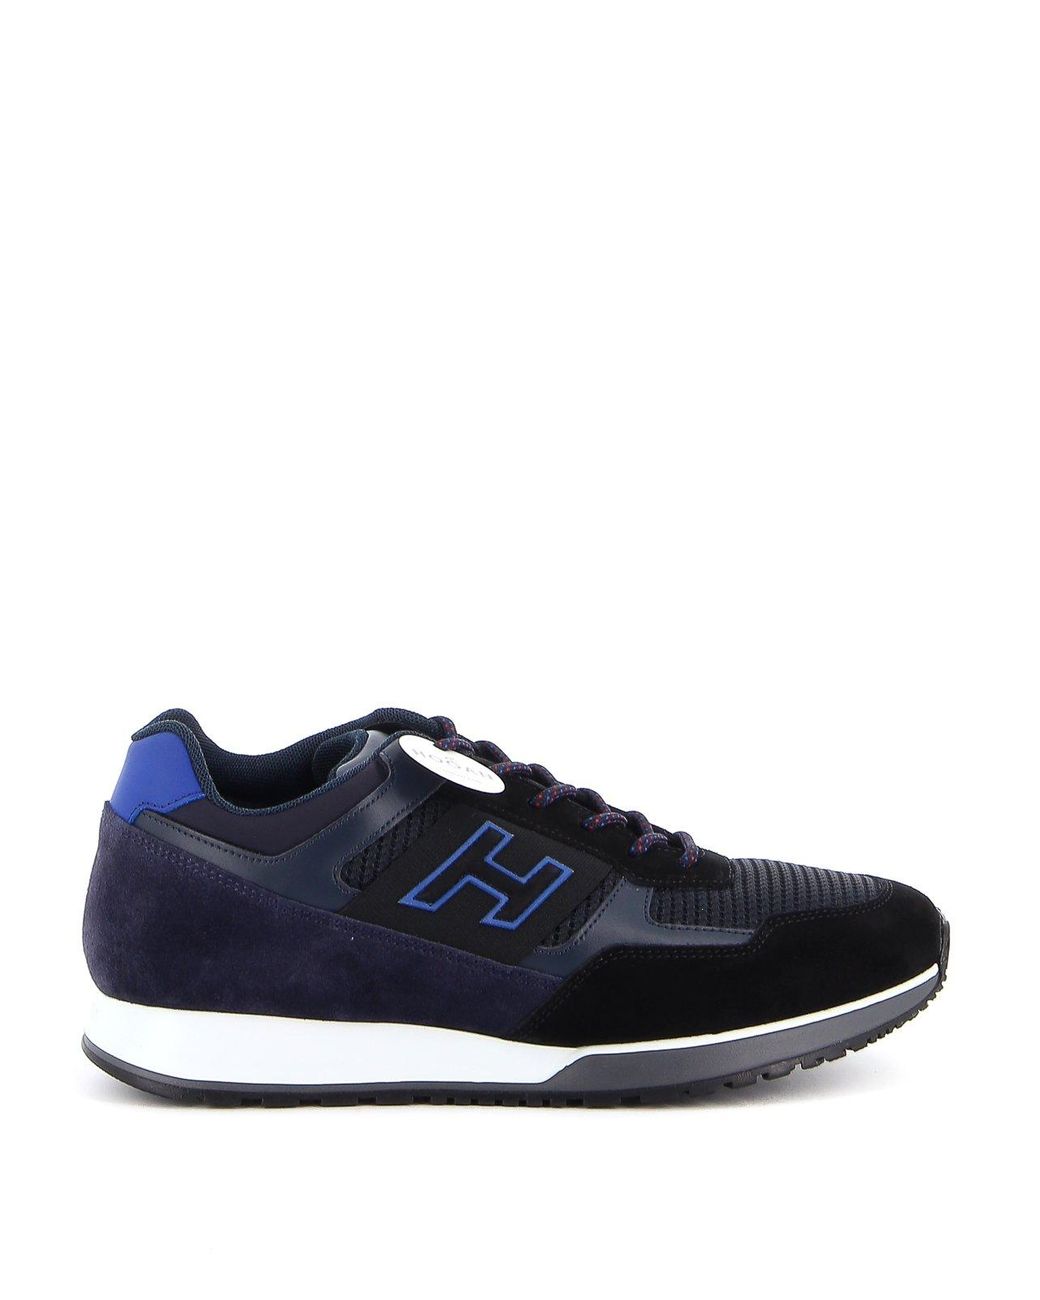 Hogan Leather H321 Low Top Sneakers in Blue for Men - Lyst